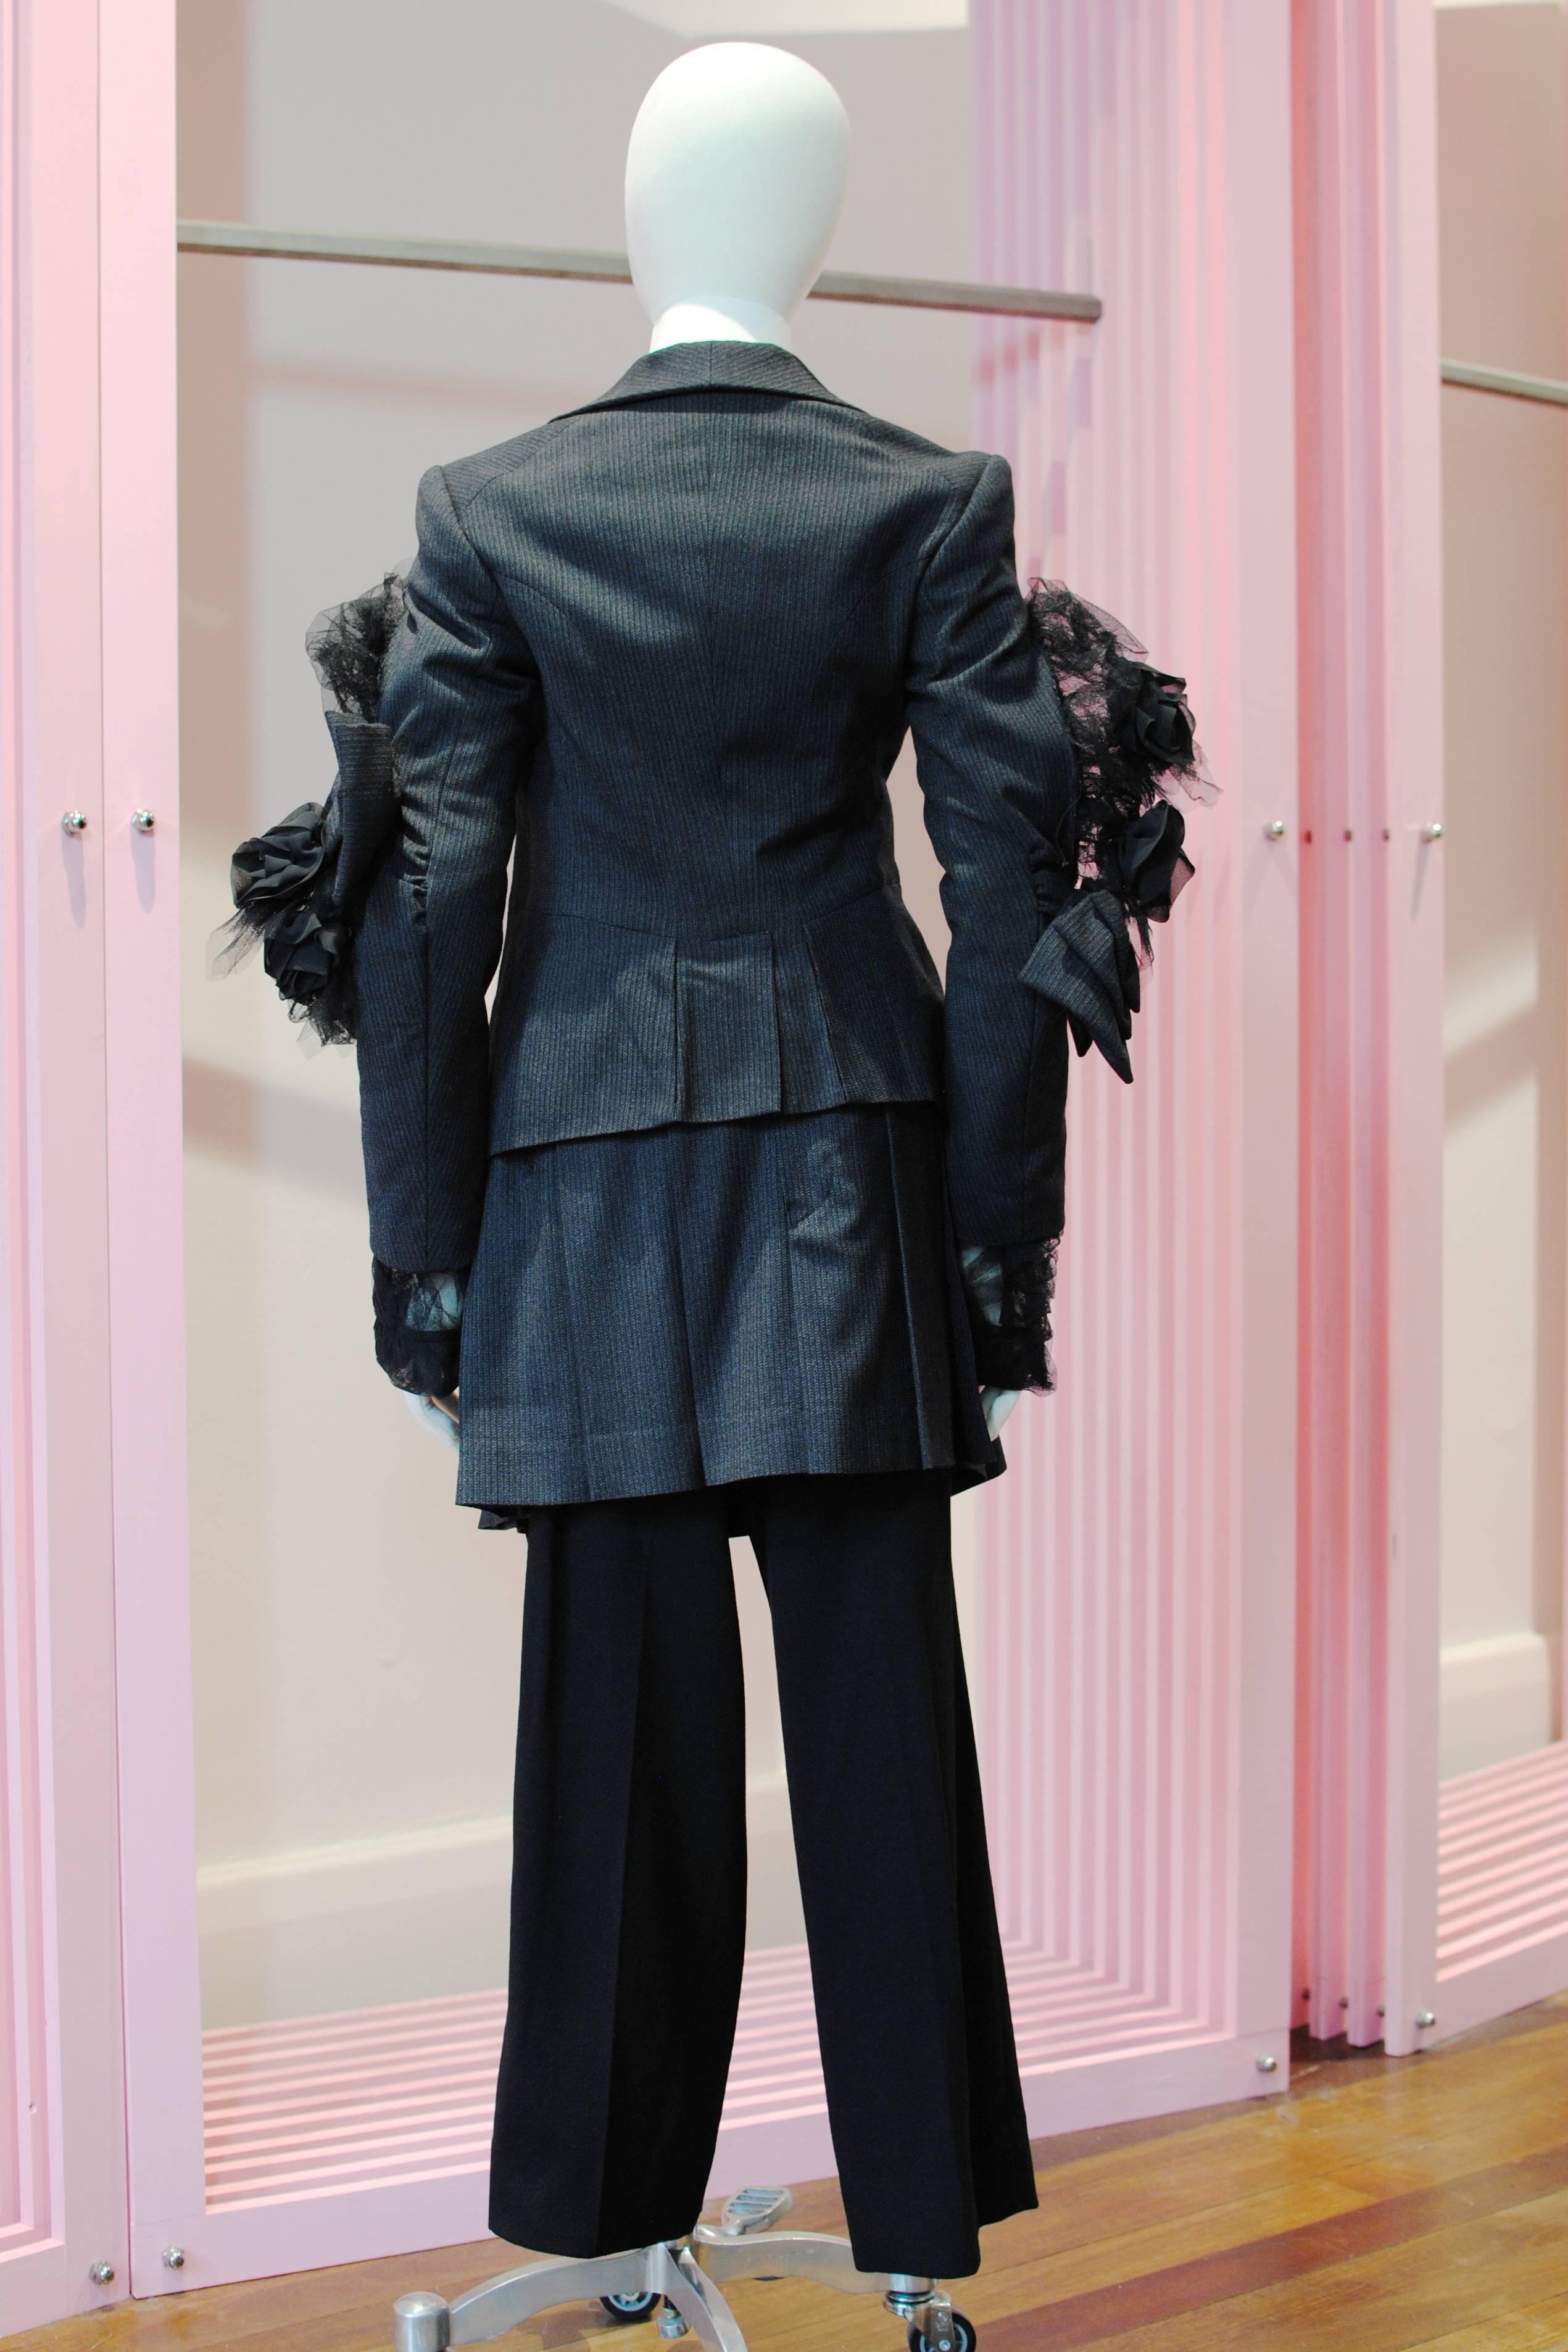 Women's 2004 COMME des GARÇONS grey and black double layered suit For Sale